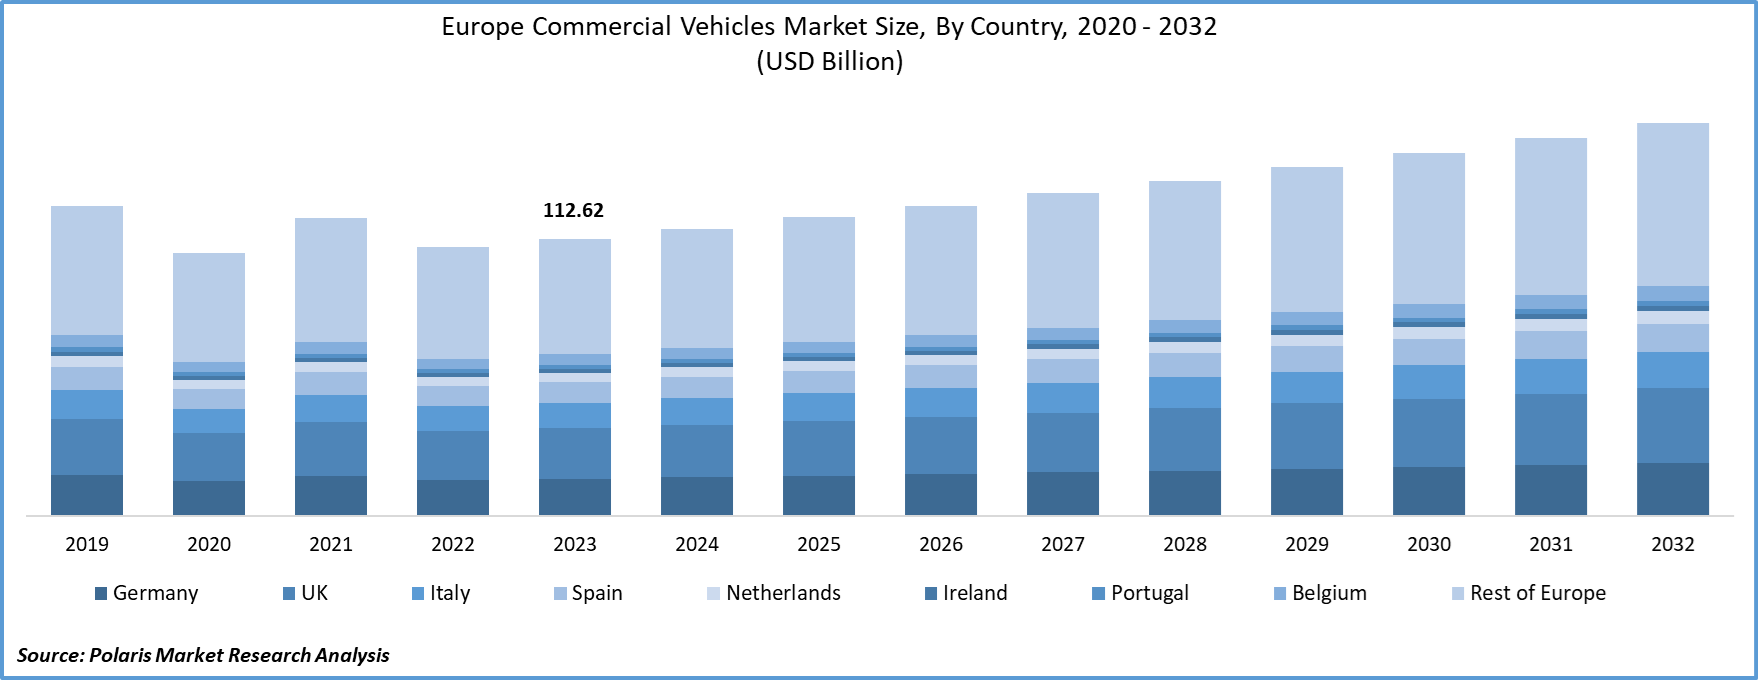 Europe Commercial Vehicles Market Size